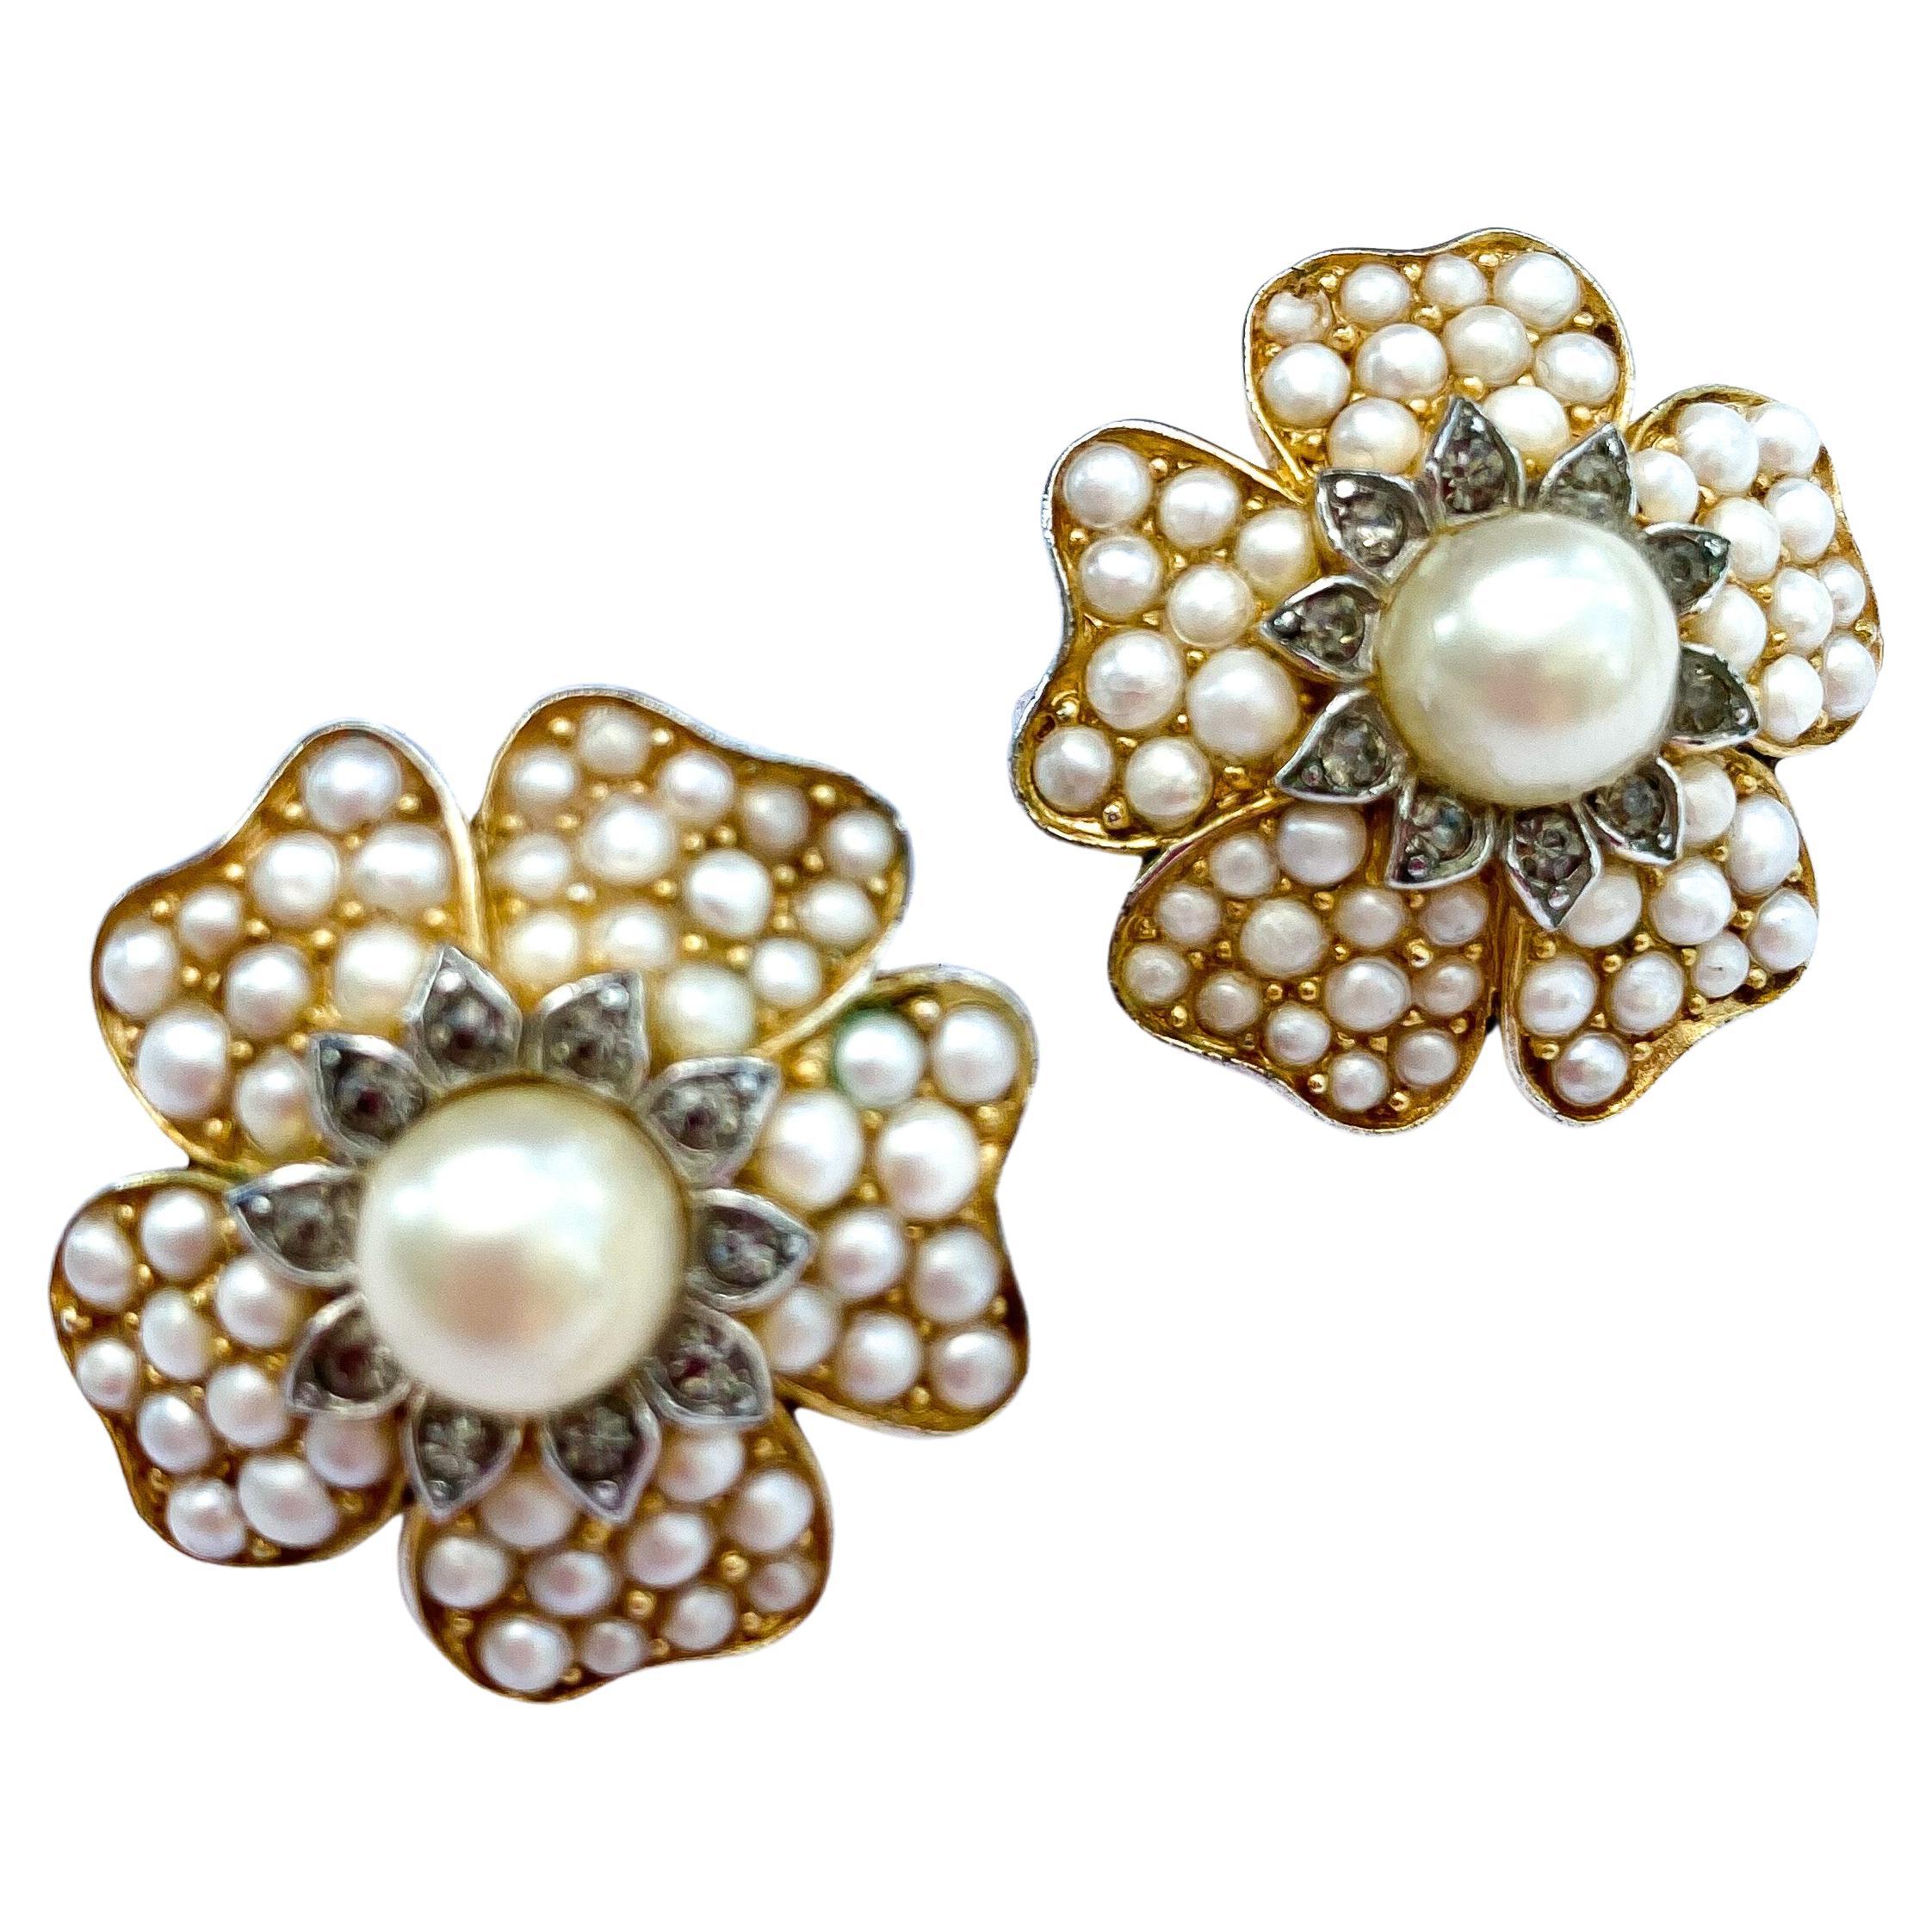 A beautiful pair of 'flower' or 'camellia' earrings made by Trifari, in the 1960s, with a subtle and chic combination of tones. Unusual grey coloured pastes sit side by side with cream paste pearls, all small. giving a finesse and wearablity to